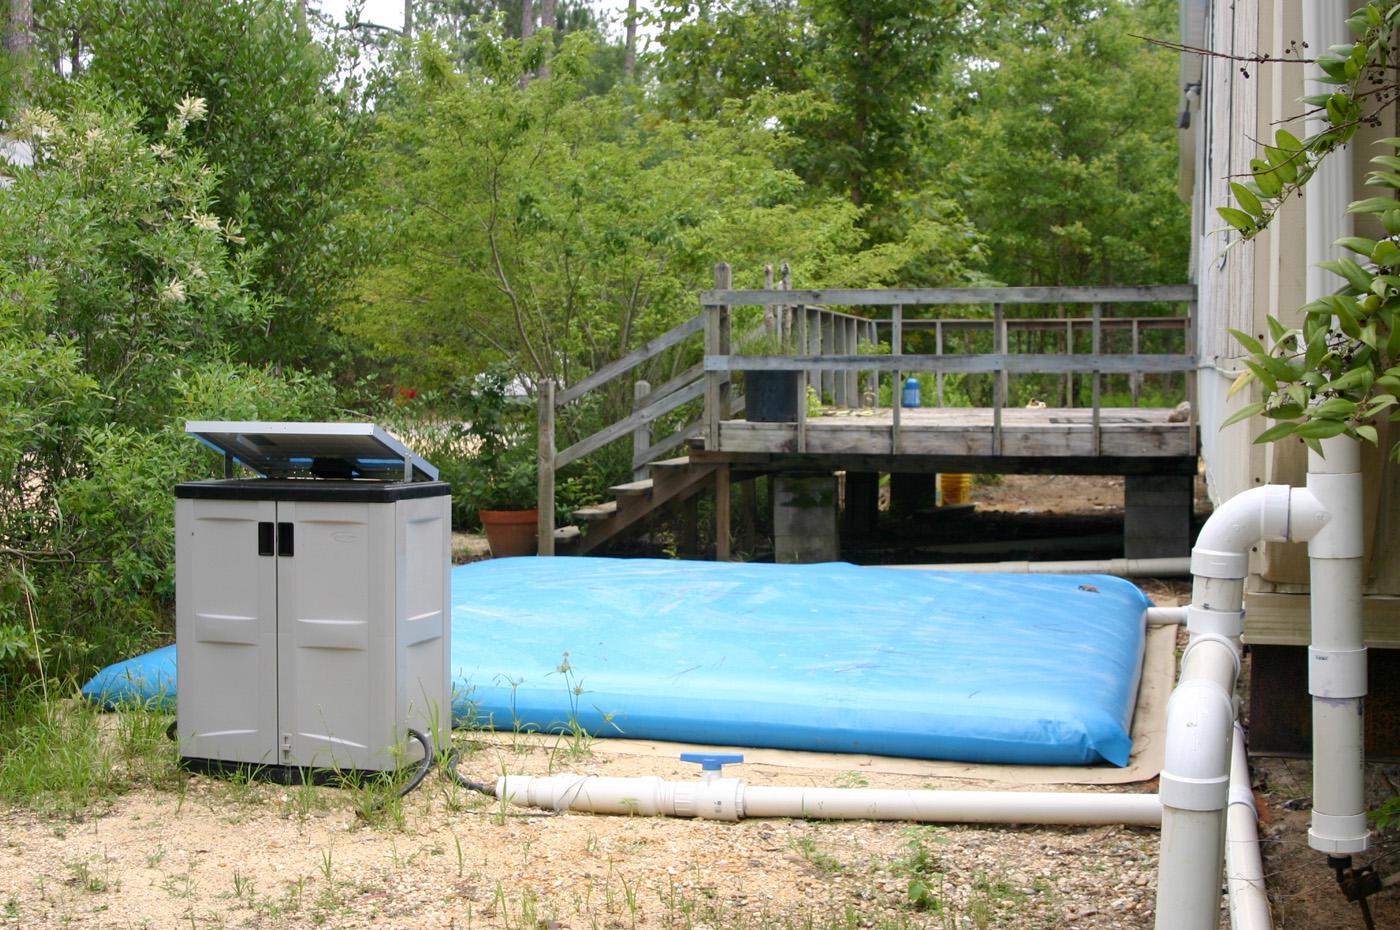 A rainwater harvesting system donated to the Crosby arboretum by Avon Engineered Fabrications collects run-off in a flexible storage tank. (Submitted photo.)